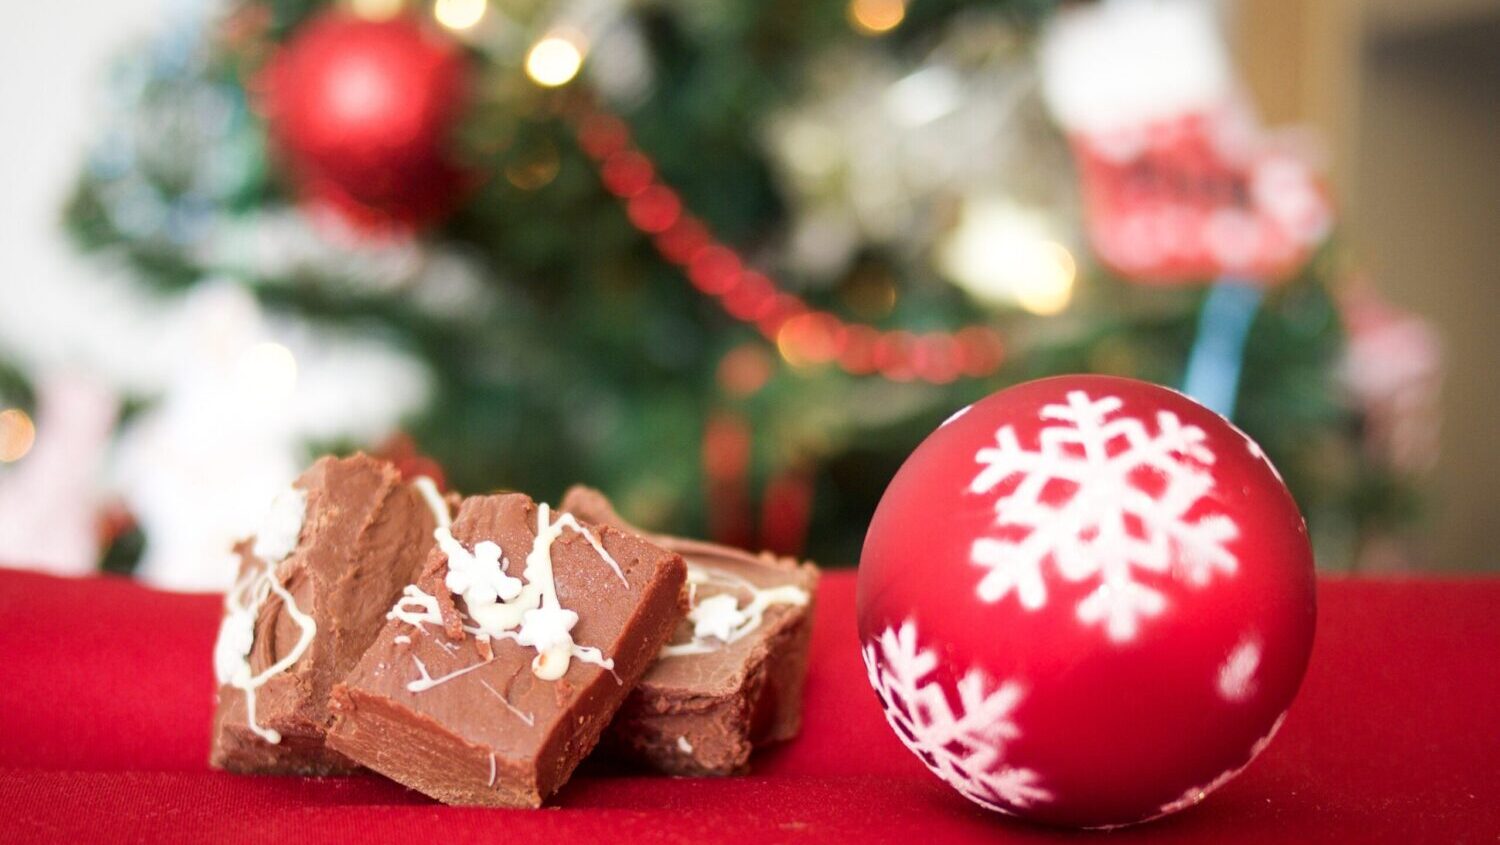 ChocolateChoclate sweets with Christmas decor